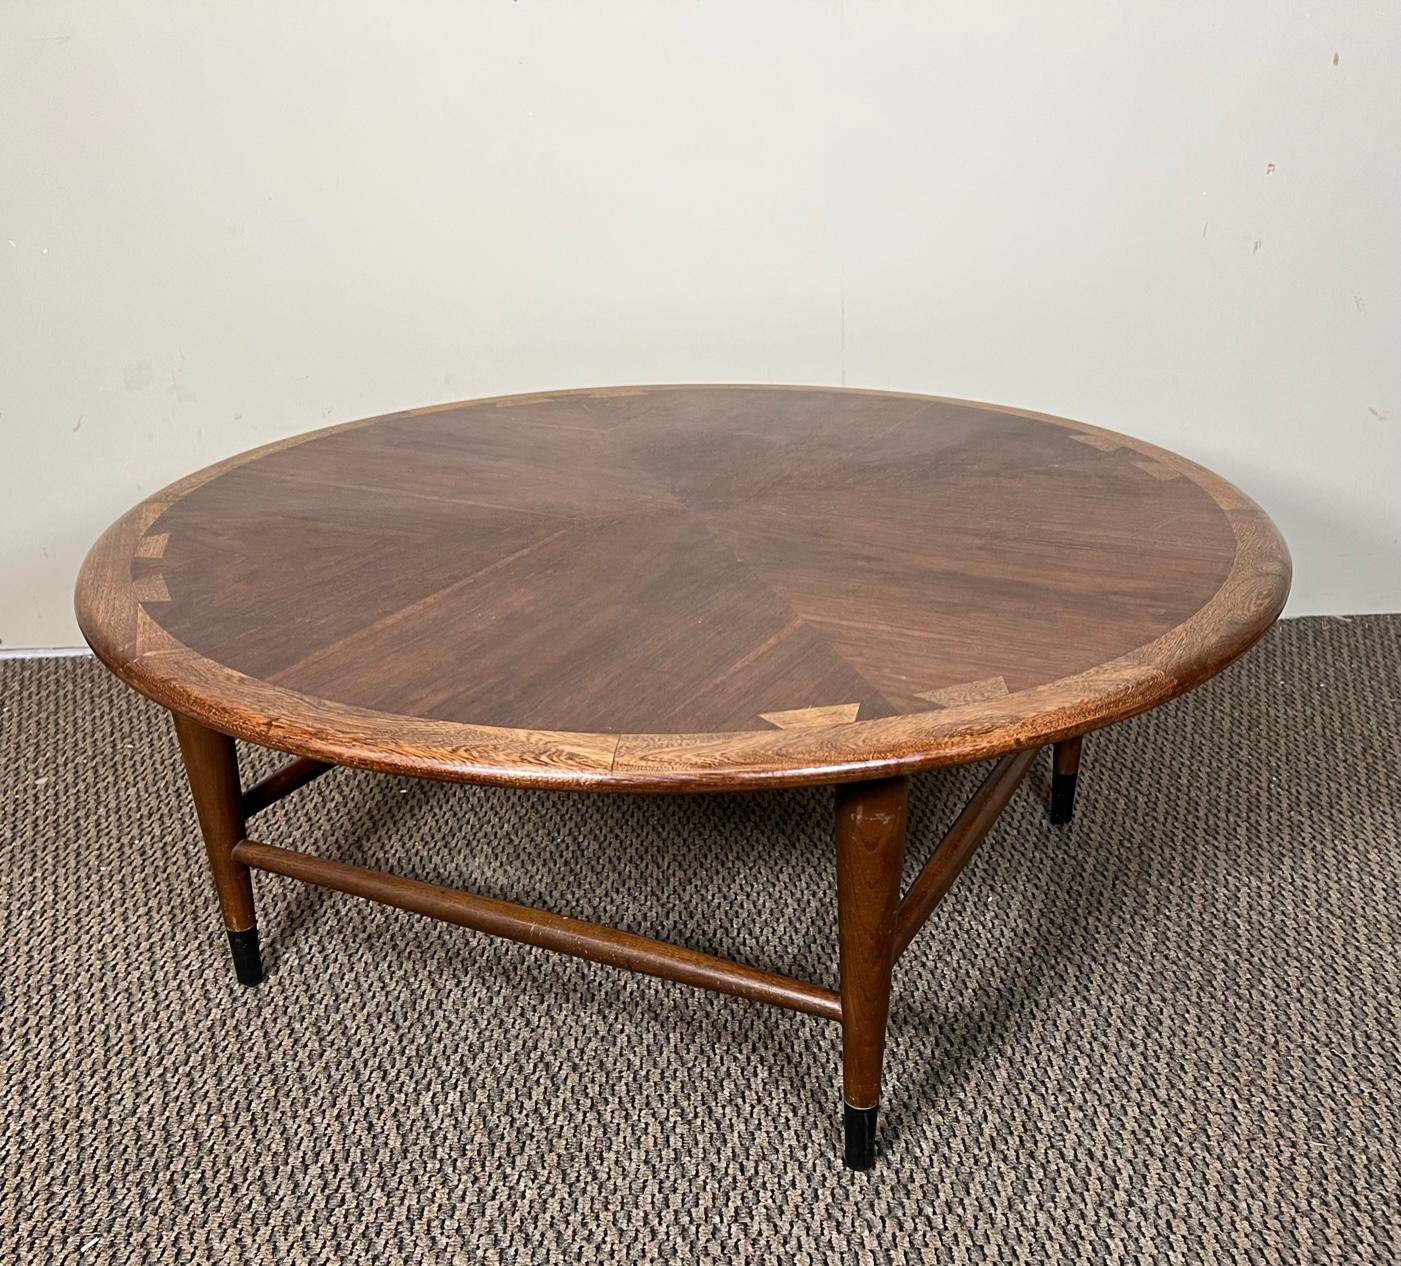 Stunning mid-century modern round dove tail coffee table by Lane Acclaim. Stamped underneath. 

Very nice condition overall. Unrefinished orginal condition. Some marks on the top. Some gouges on the sides.

Dimensions: 36